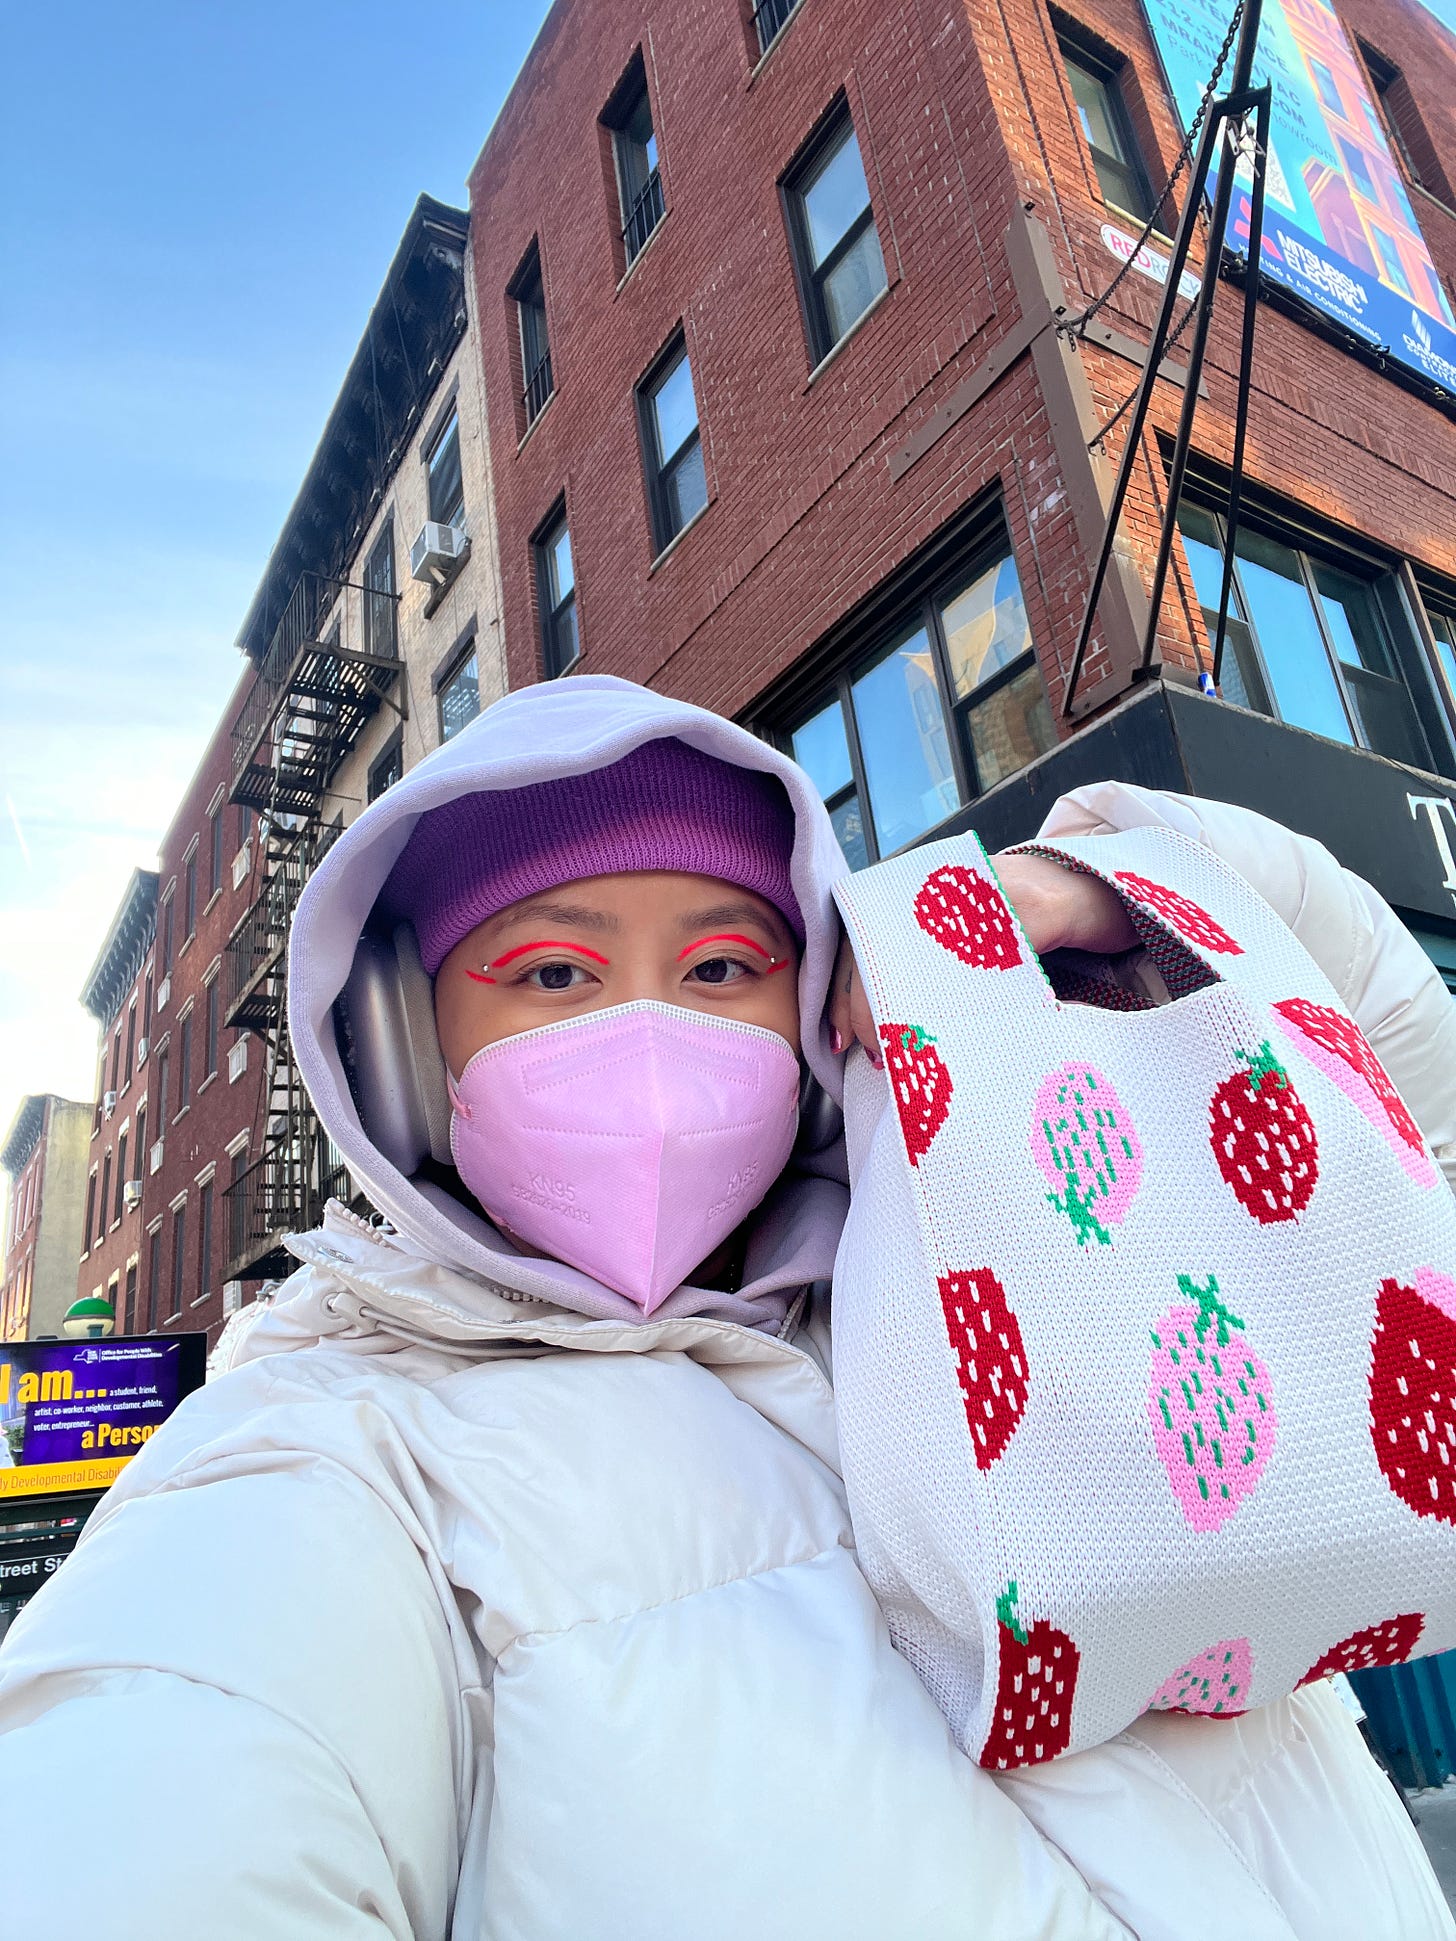 Jezz, an Asian person in their 30s, smiles with 2 KN95 masks on while outside in NYC. They're wearing a white puffer jacket, purple beanie, and holding a strawberry-print knitted tote bag. Jezz also has hot pink makeup on their eyes.